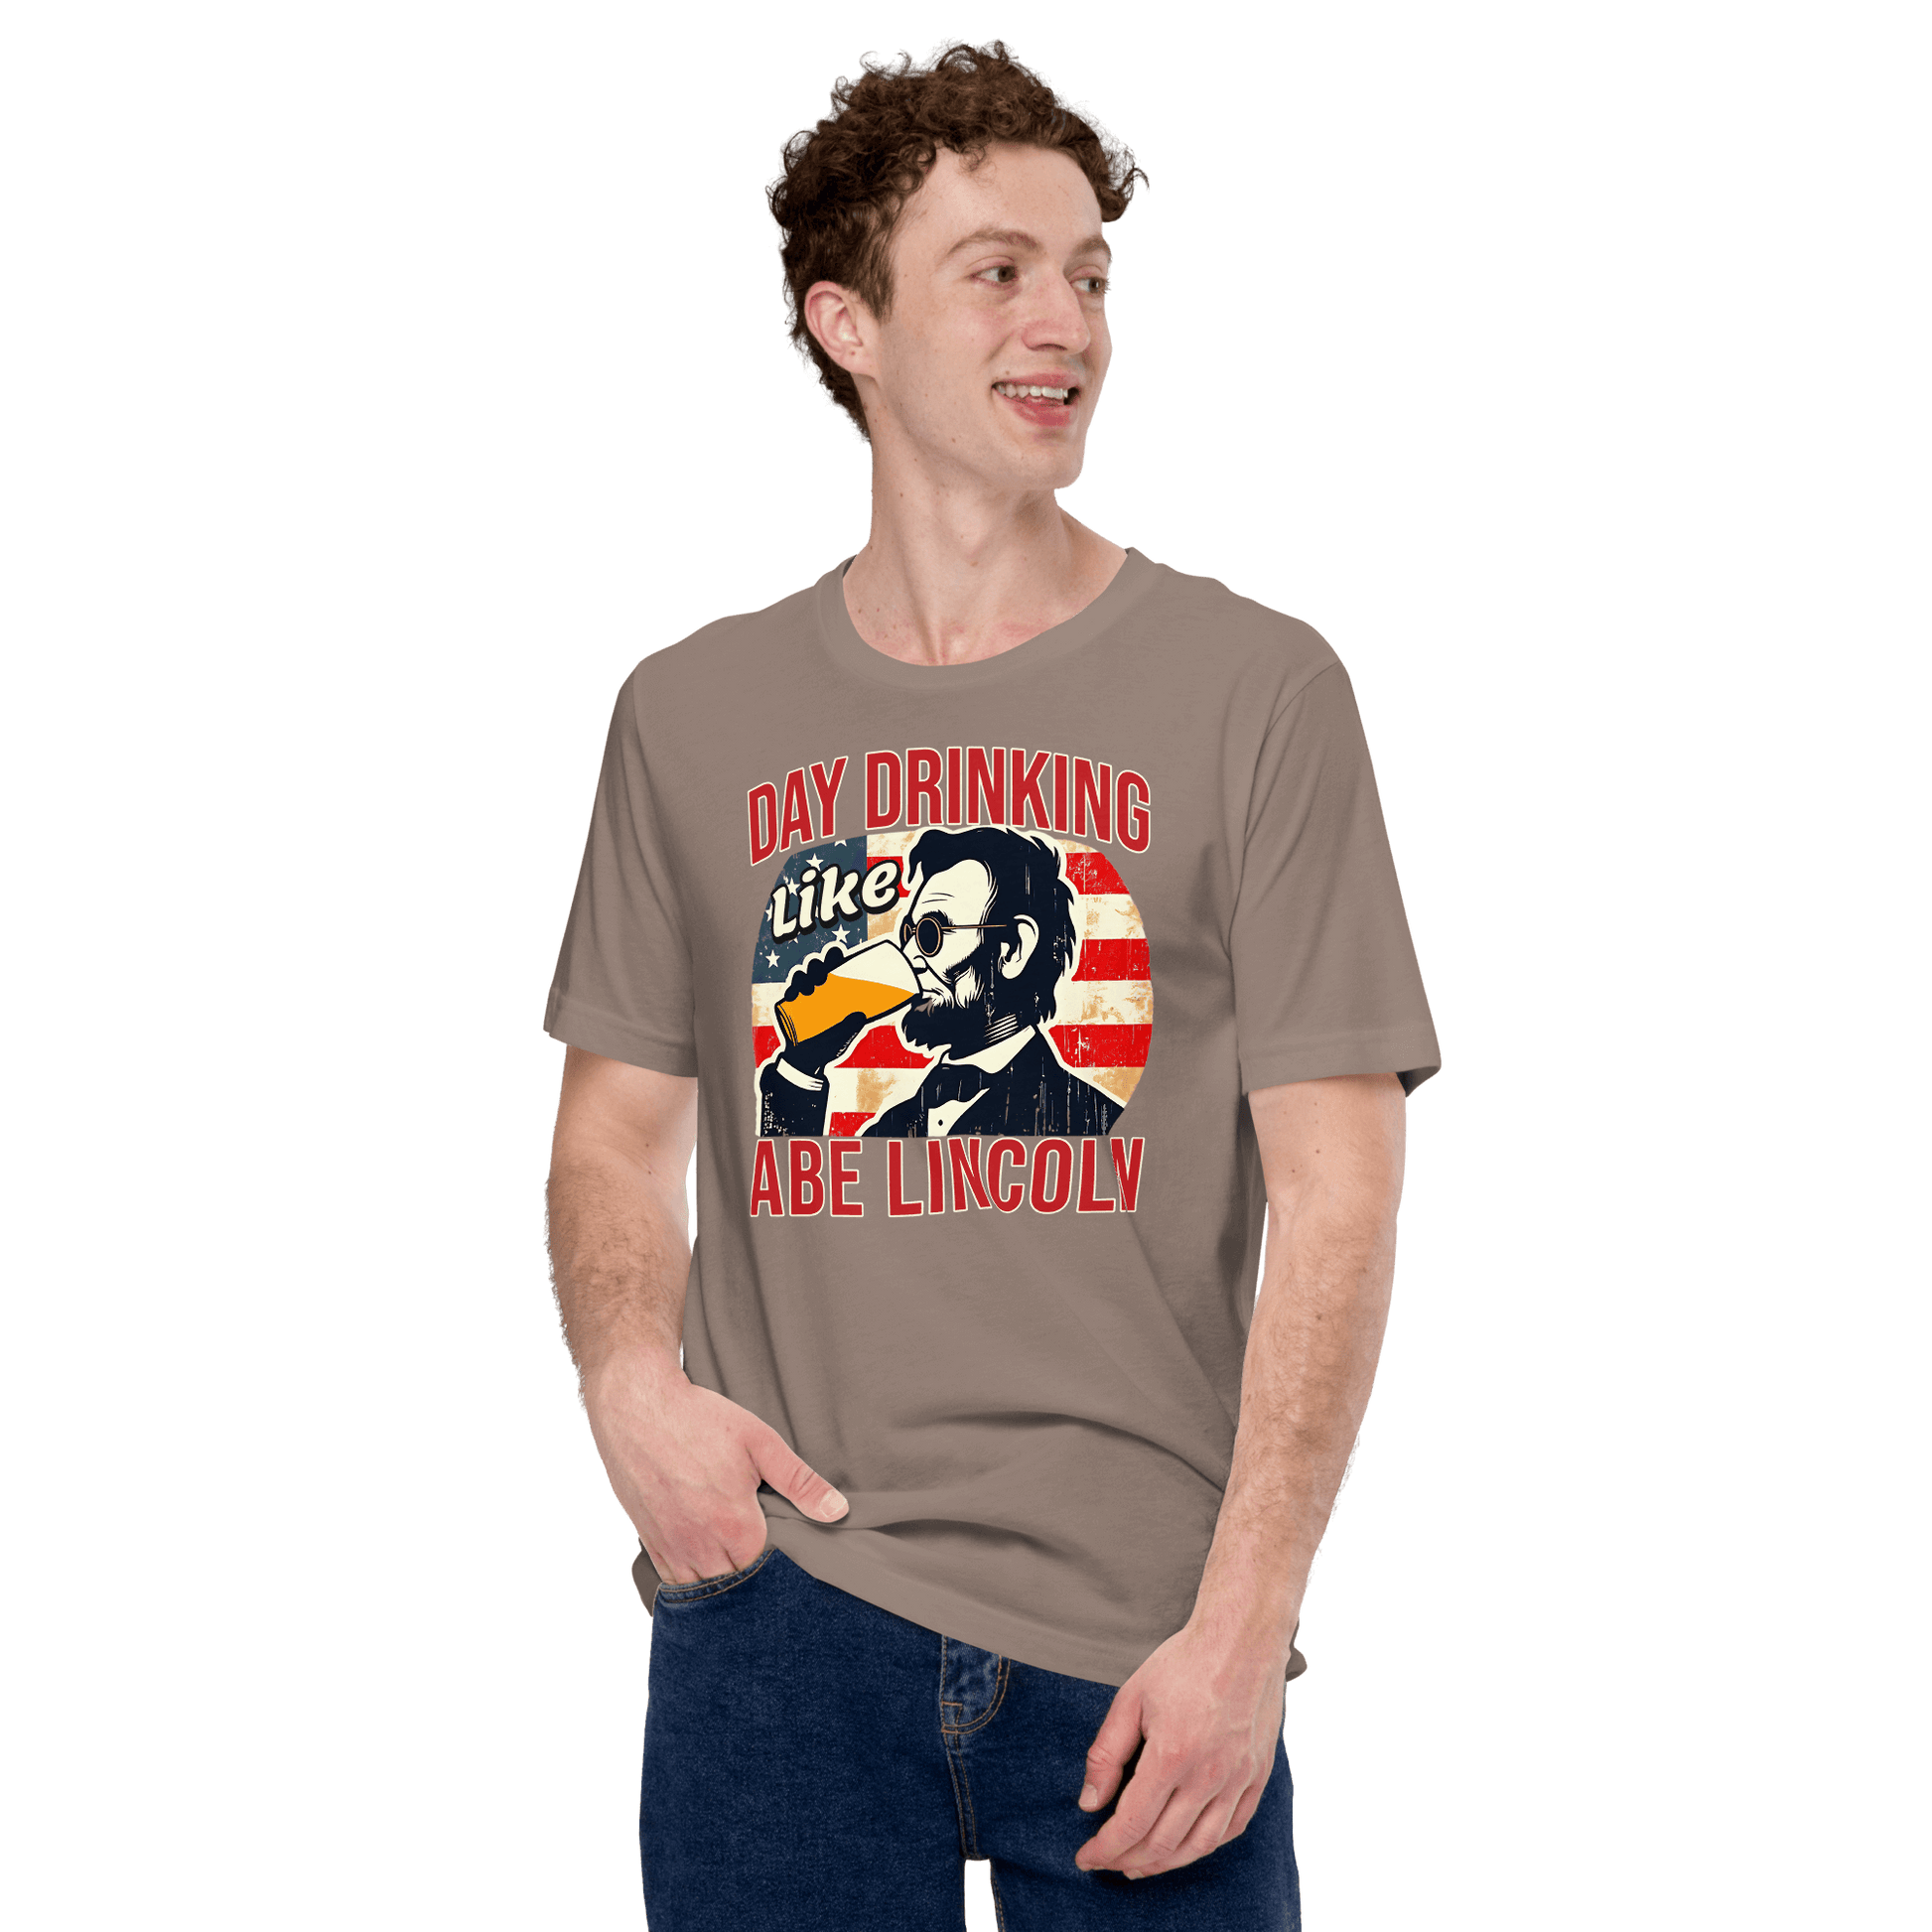 T-shirt with Day Drinking Like Abe Lincoln text, image of Abe Lincoln drinking a glass of beer, and distressed American flag background. Perfect for 4th of July.